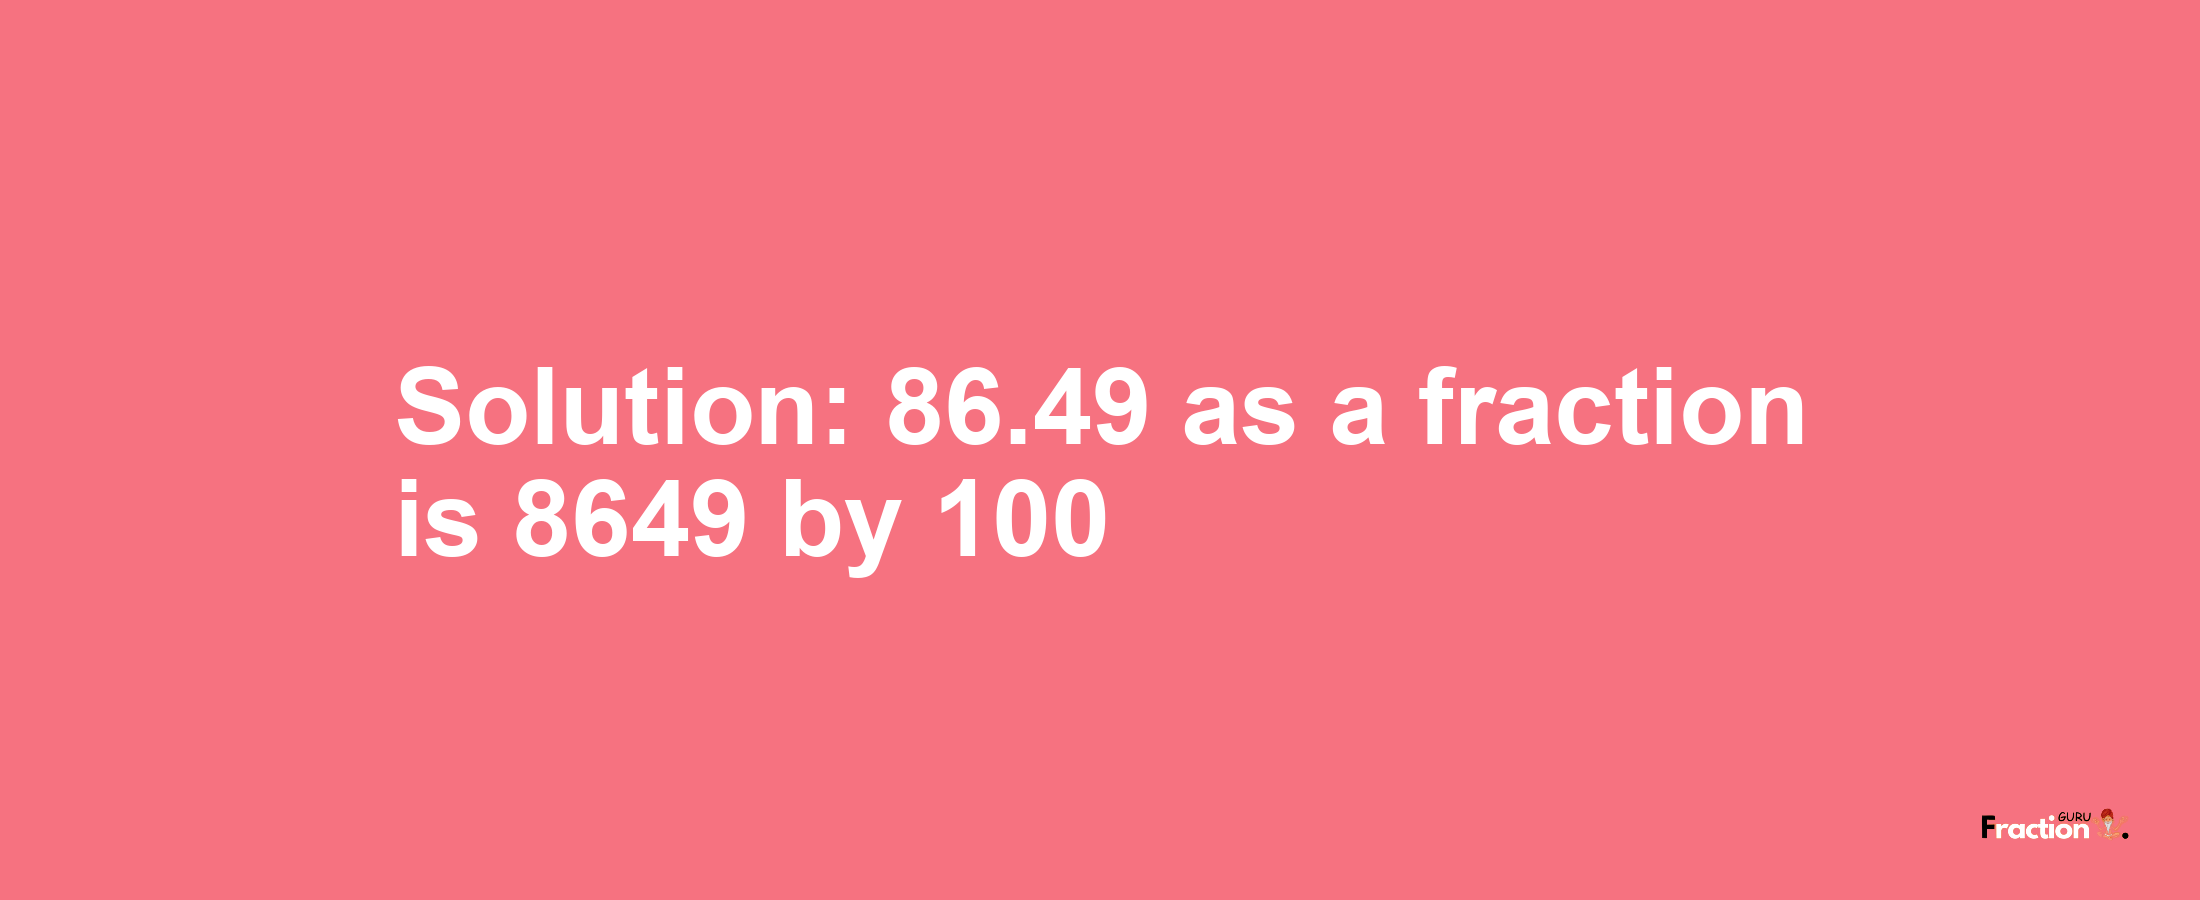 Solution:86.49 as a fraction is 8649/100